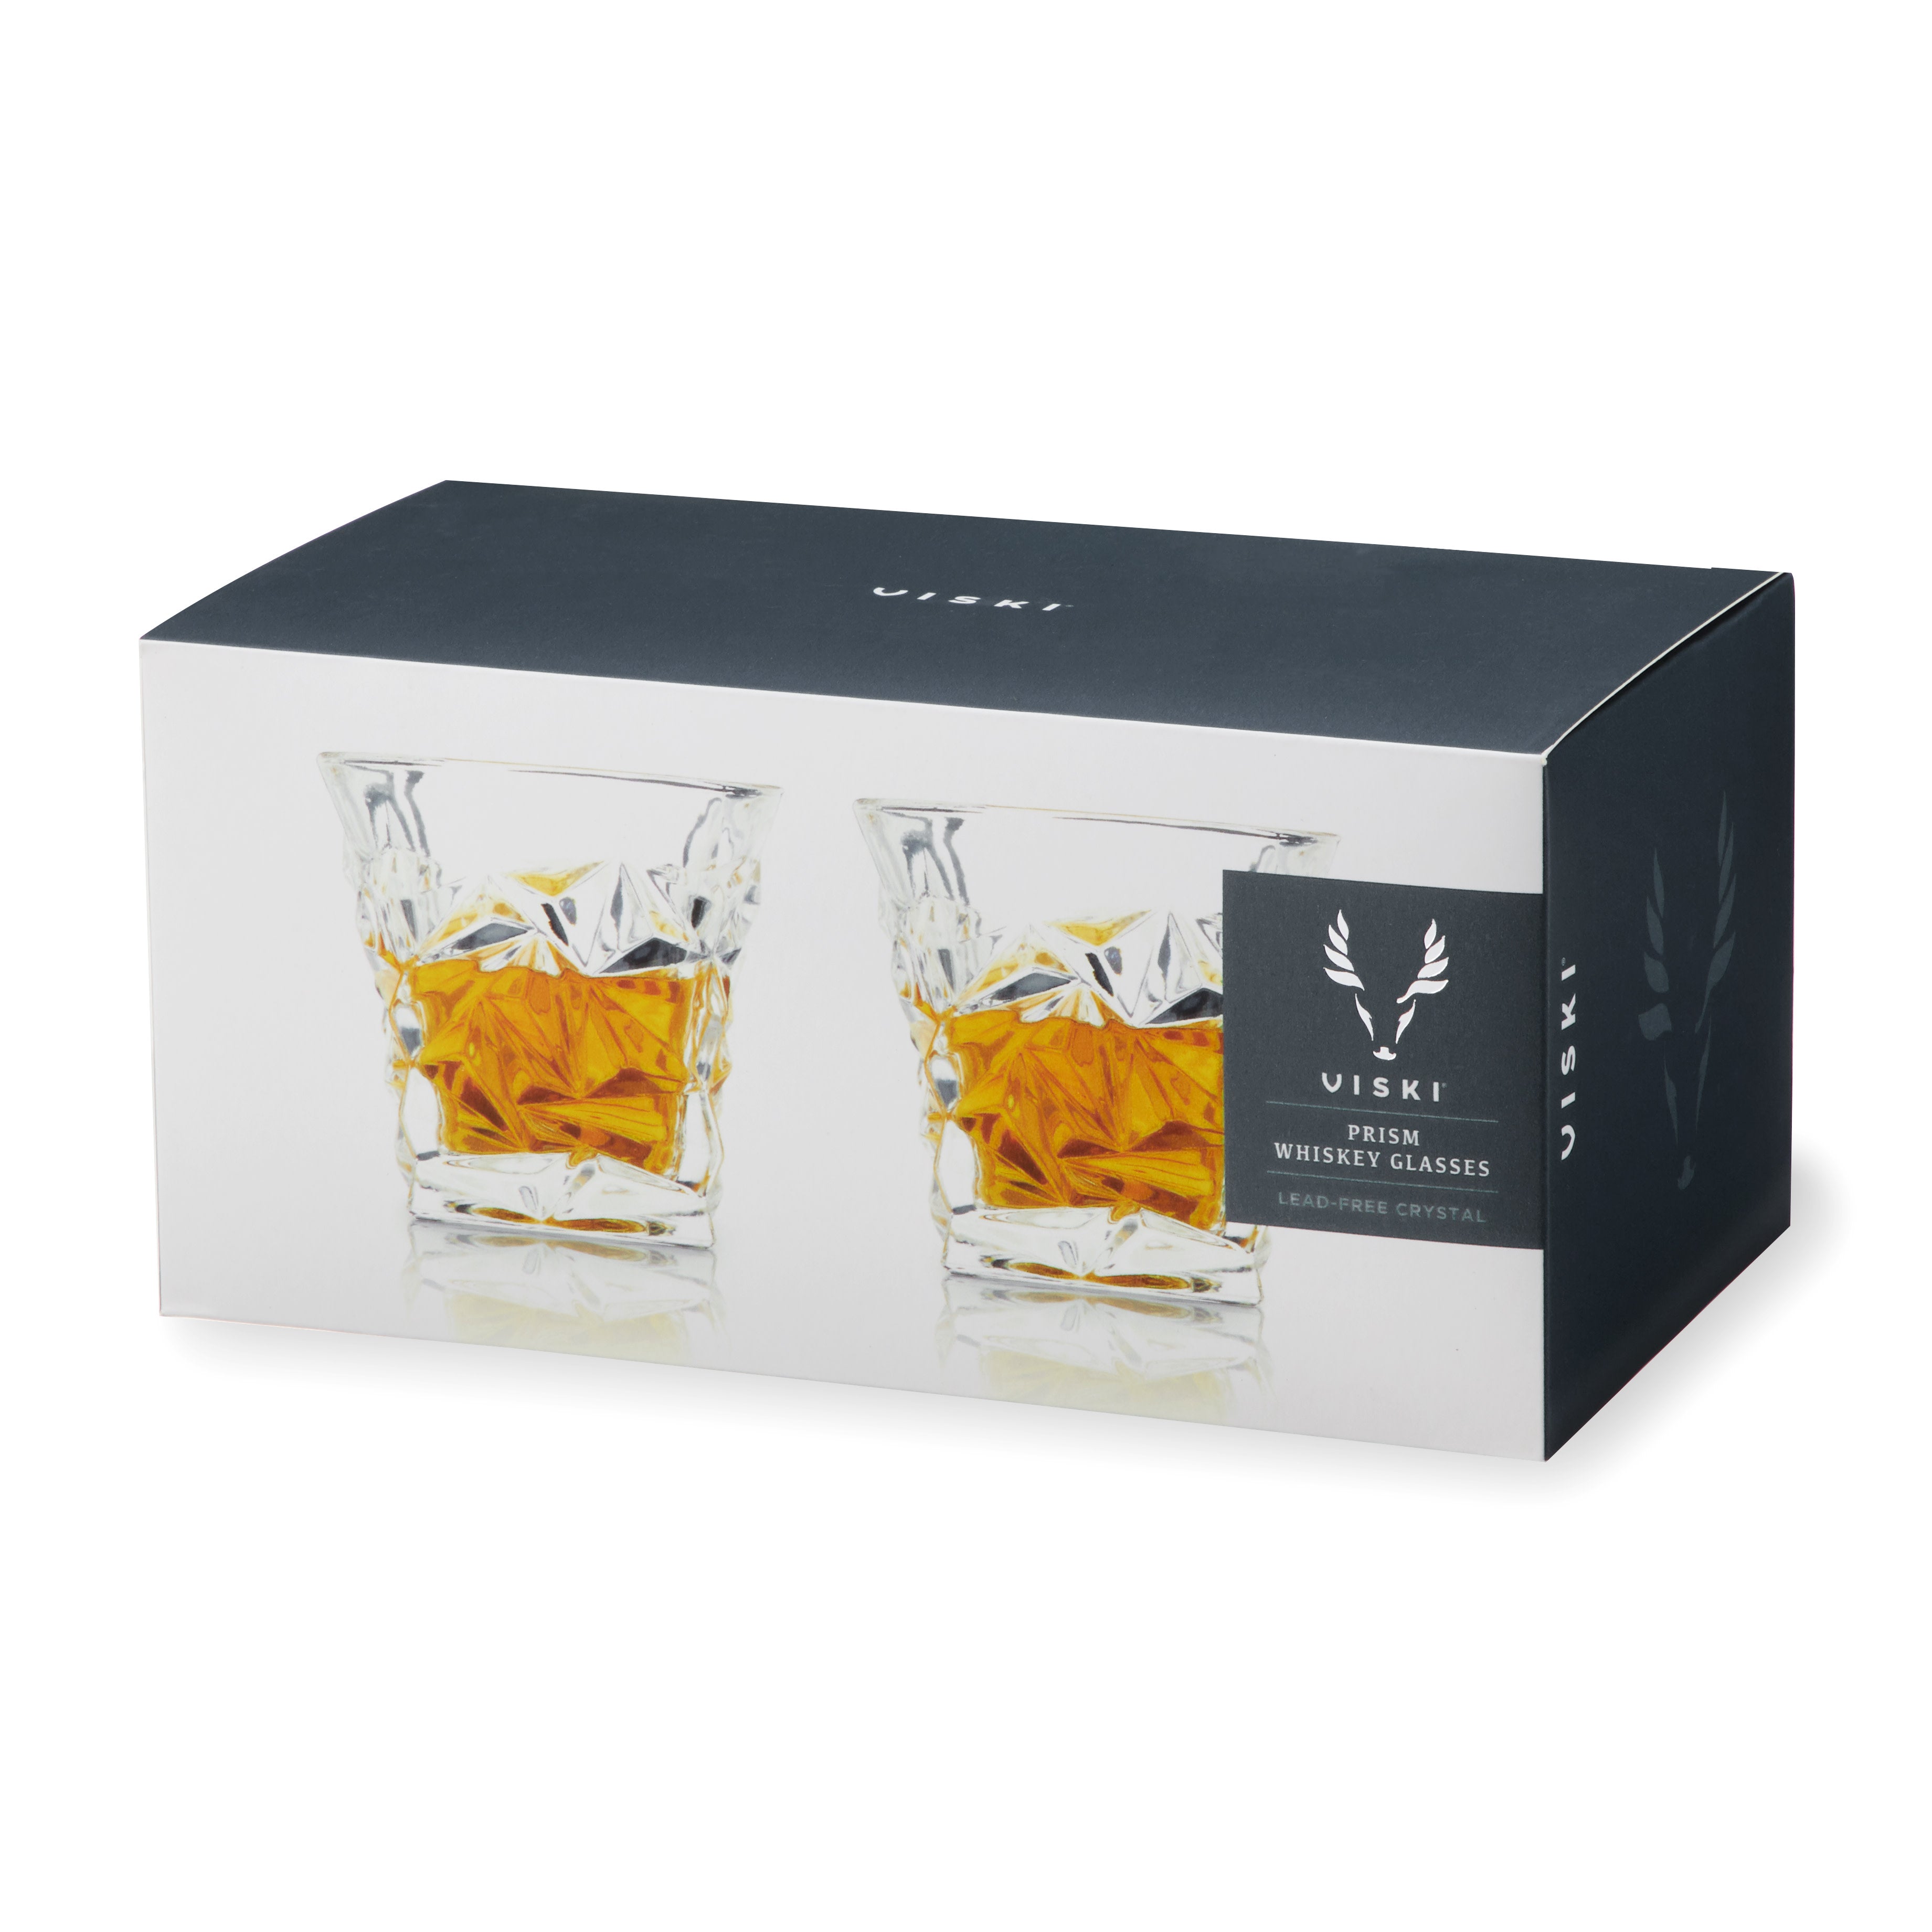 Vaci Crystal Whiskey Glasses – Set of 2 Bourbon Glasses,  Tumblers for Drinking Scotch, Cognac, Irish Whisky, Large 10oz Premium  Lead-Free with Stainless Steel Flasks, Cups, Luxury Gift Box: Old